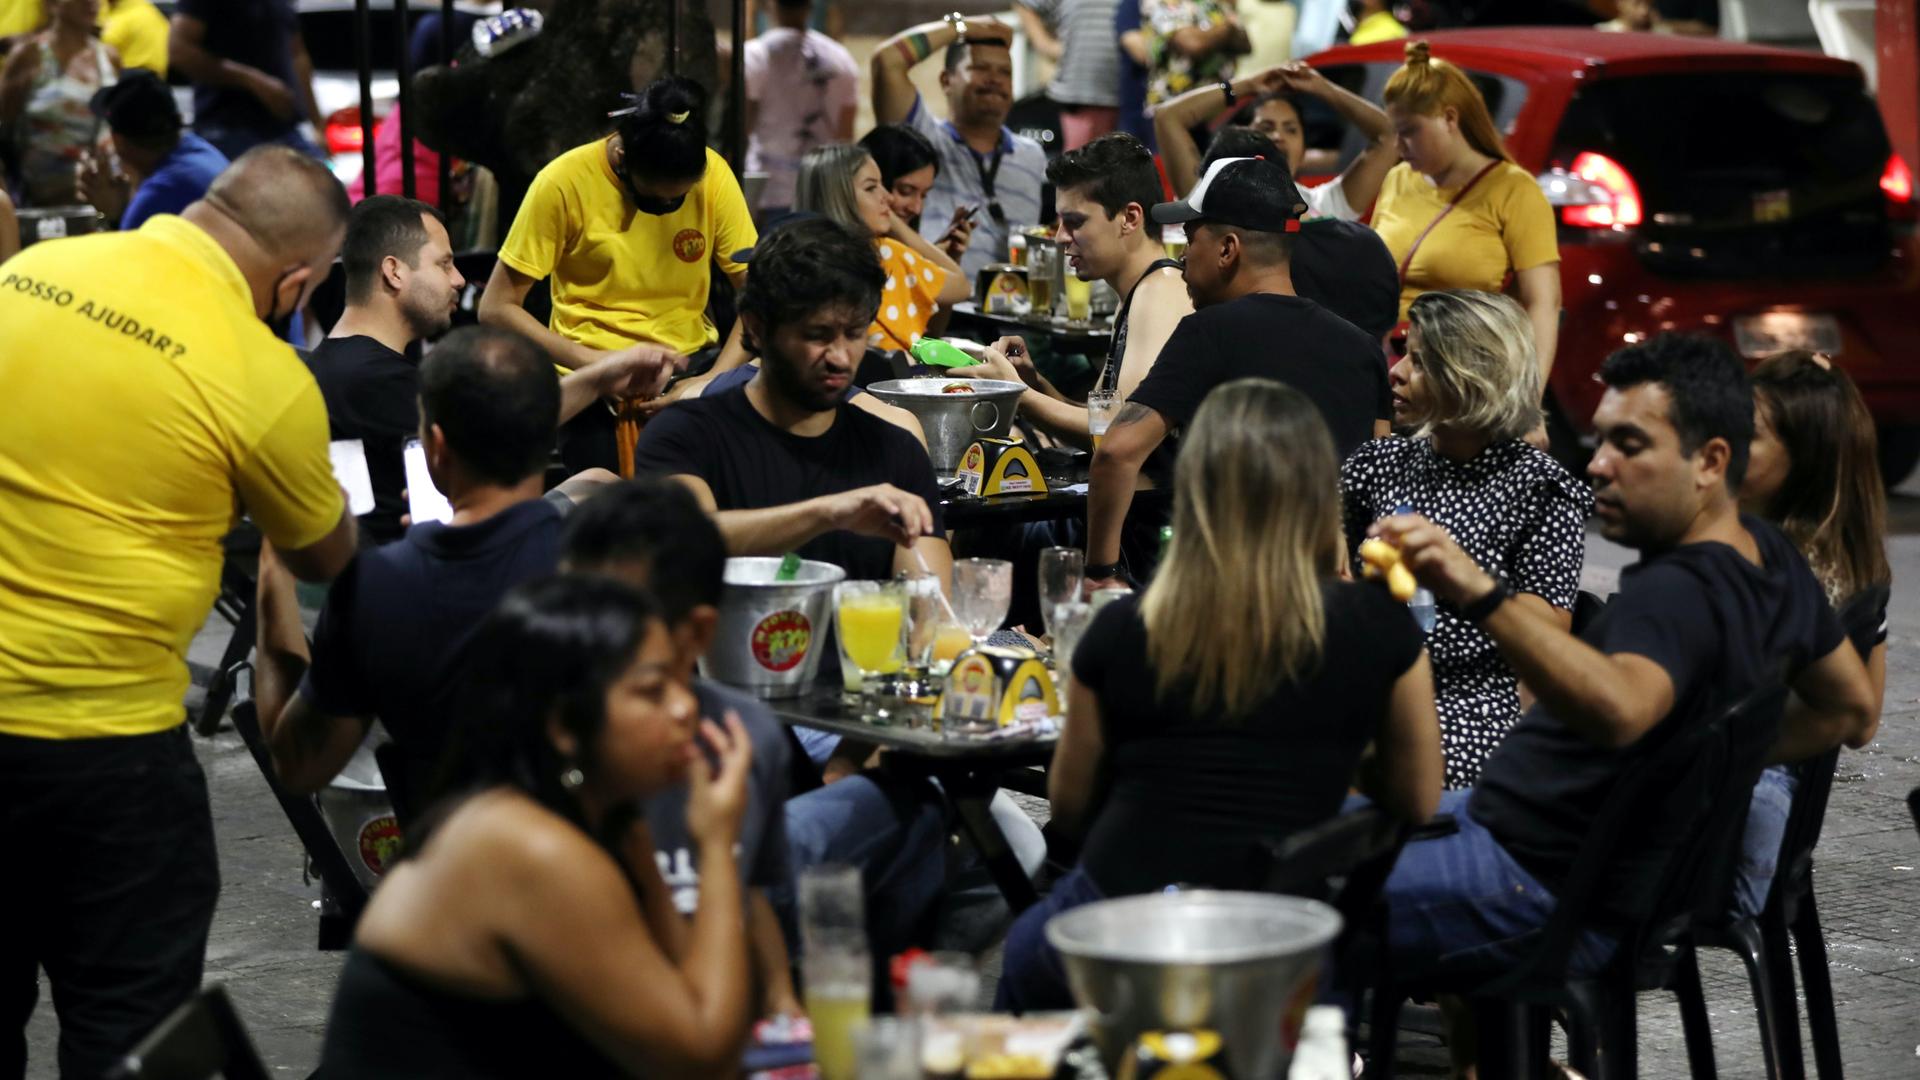 People enjoy beers and food at an outdoor restaurant where waitstaff wear yellow shirts. 